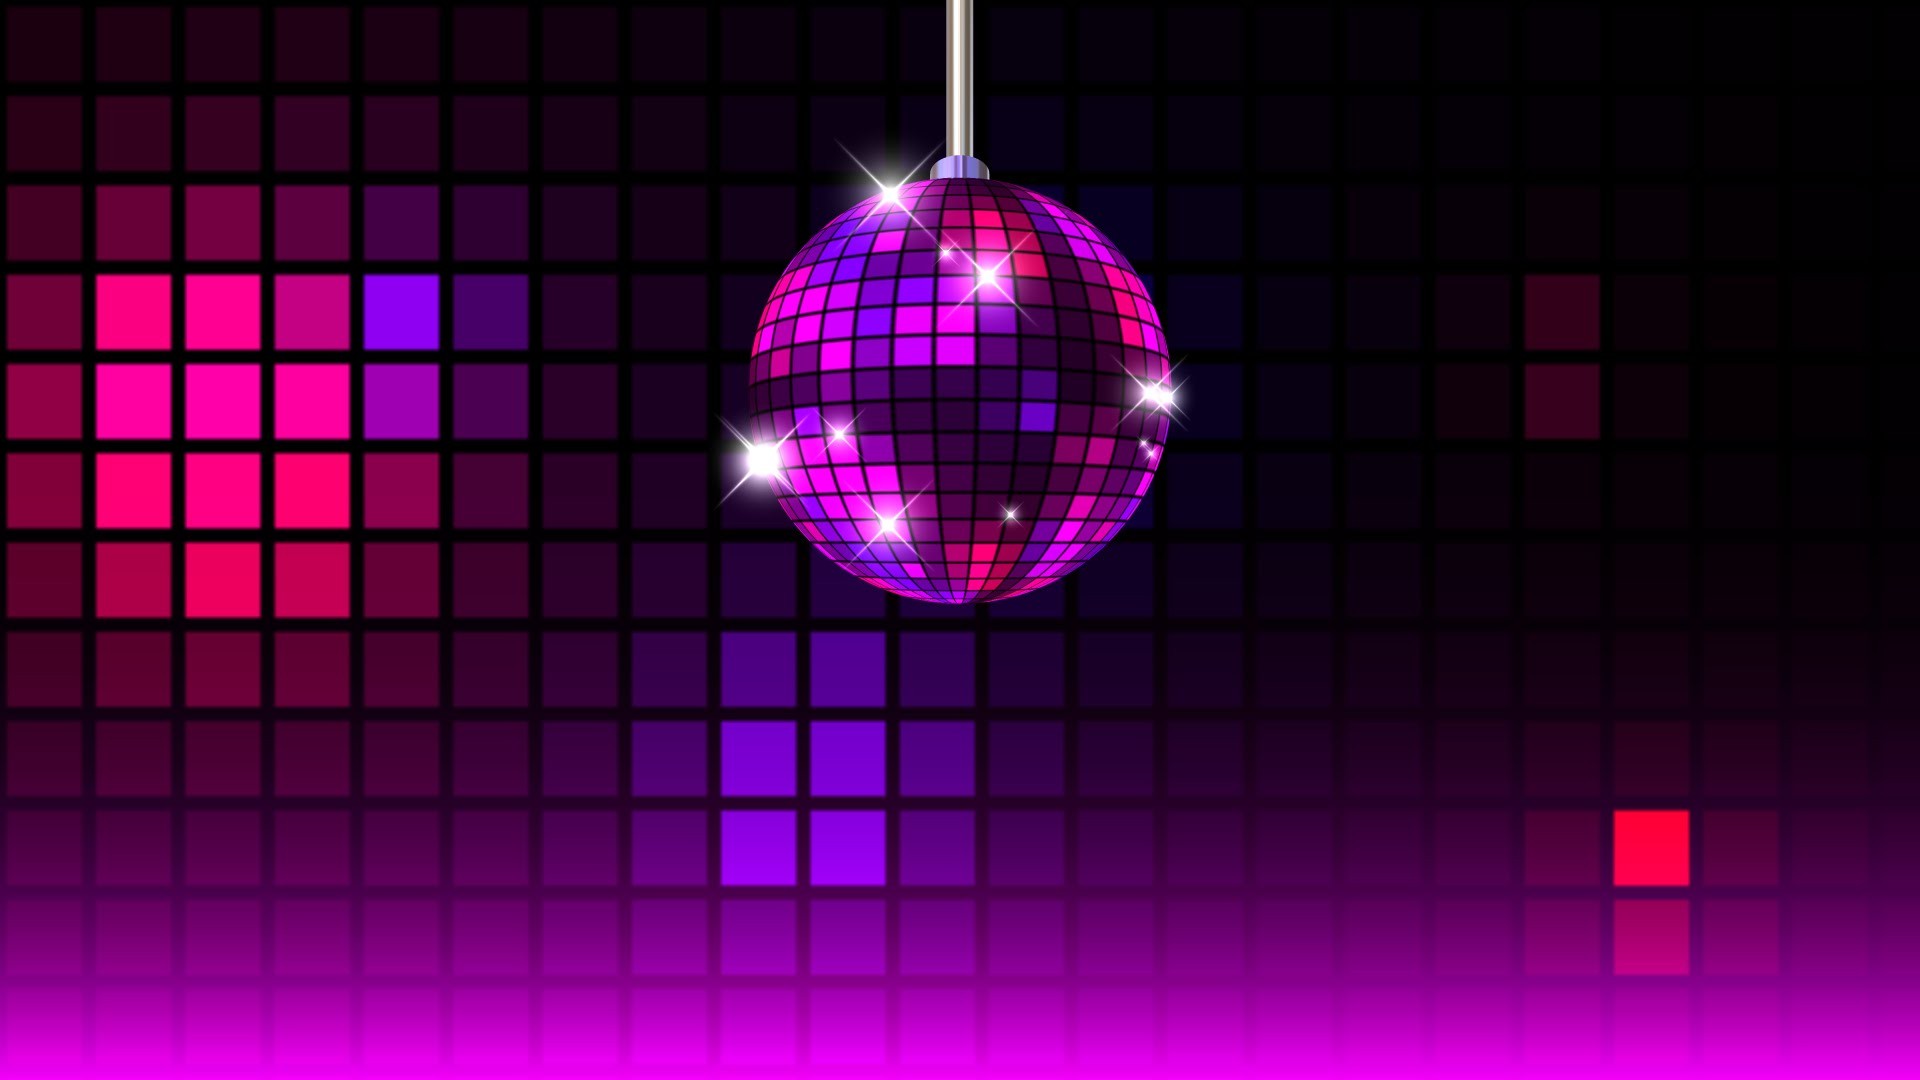 Disco Background Download Free Cool High Resolution HD Wallpapers Download Free Images Wallpaper [wallpaper981.blogspot.com]